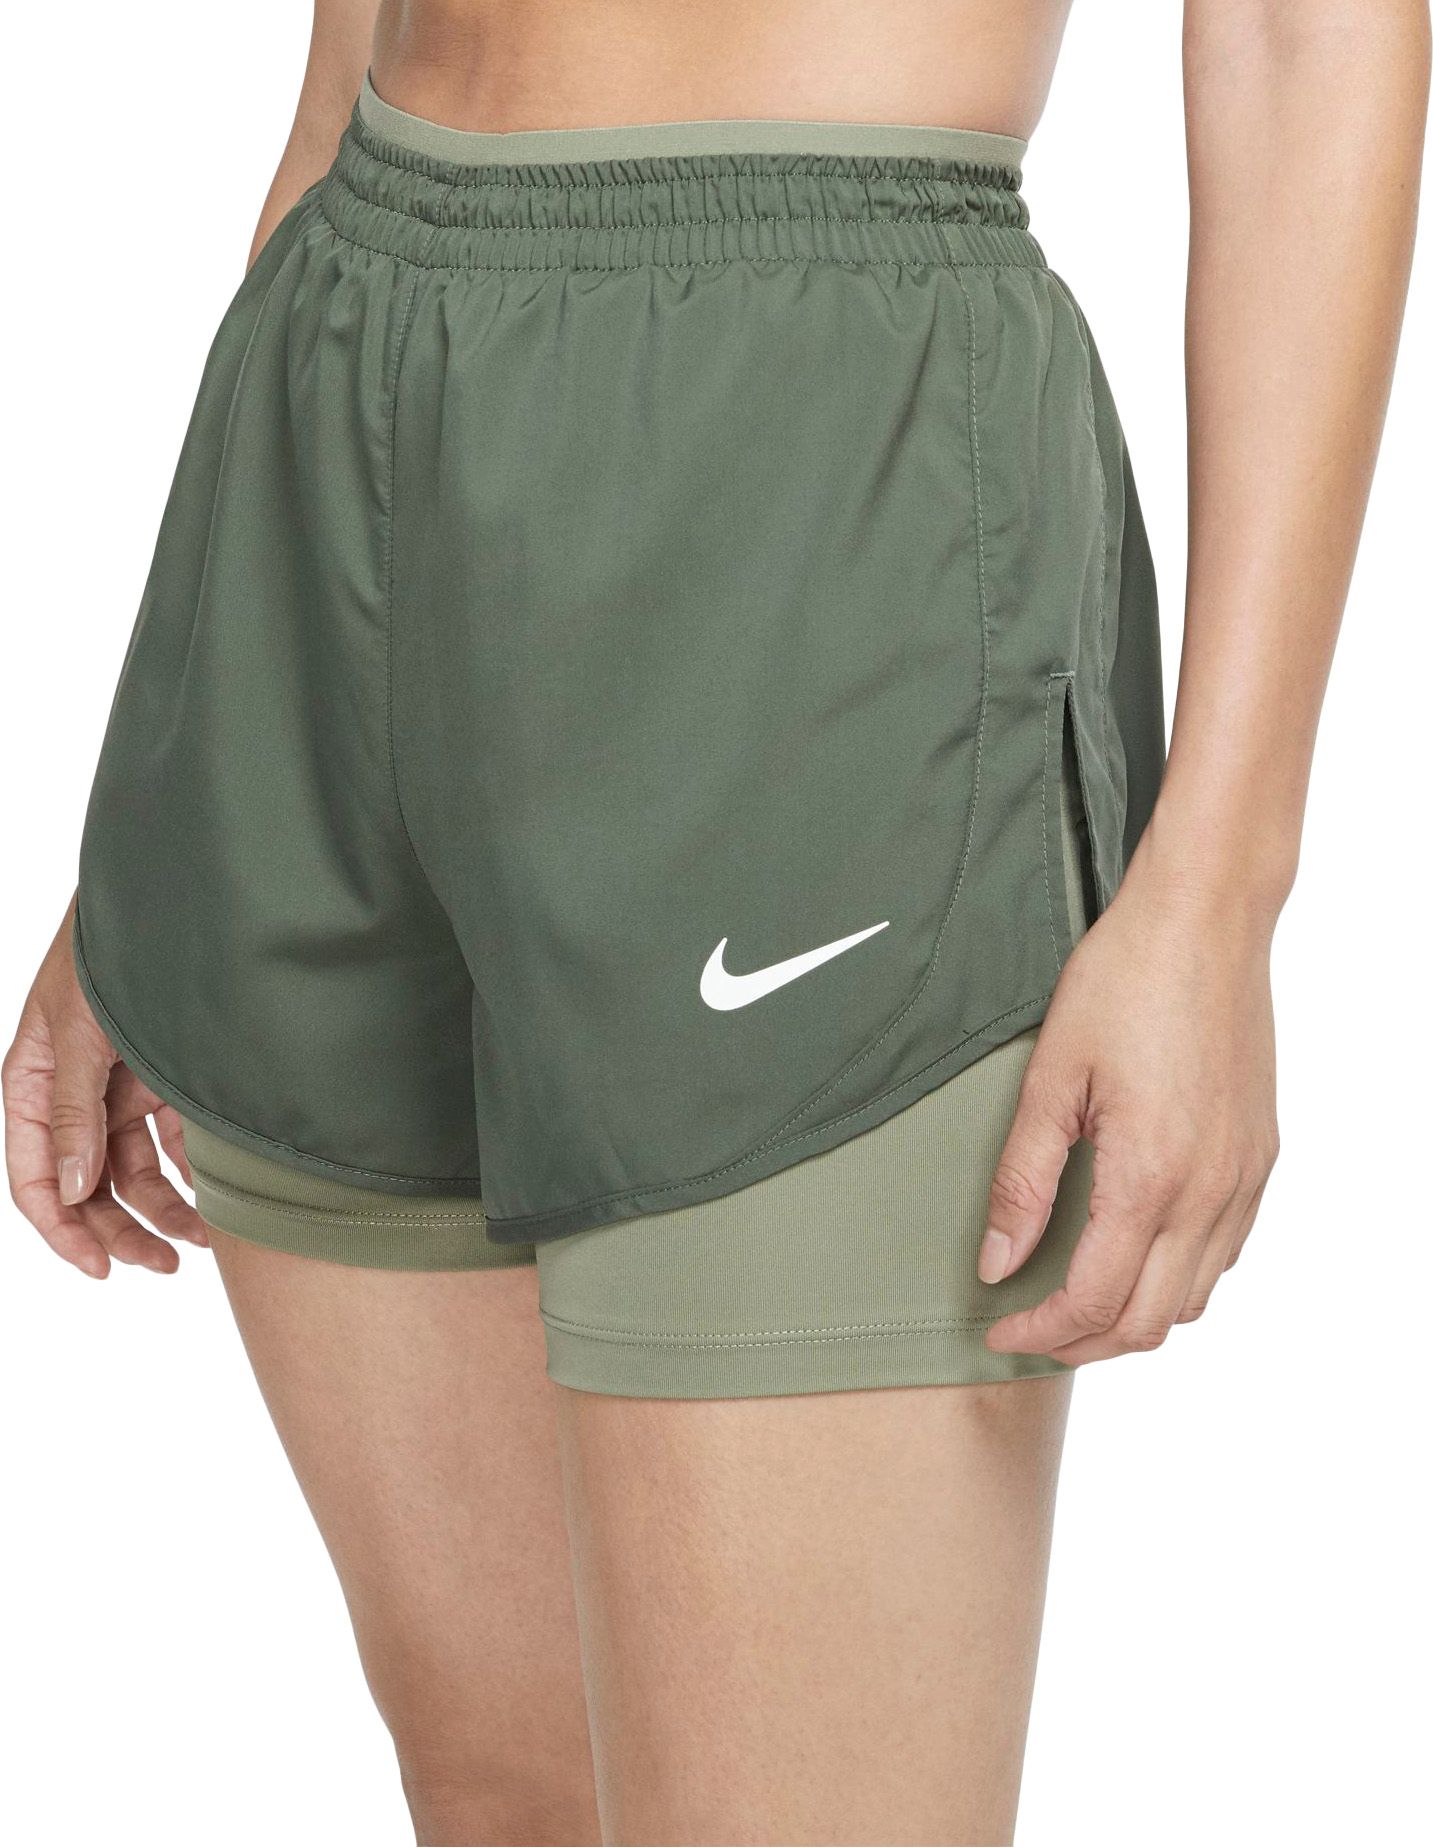 nike dry shorts 2 in 1 womens